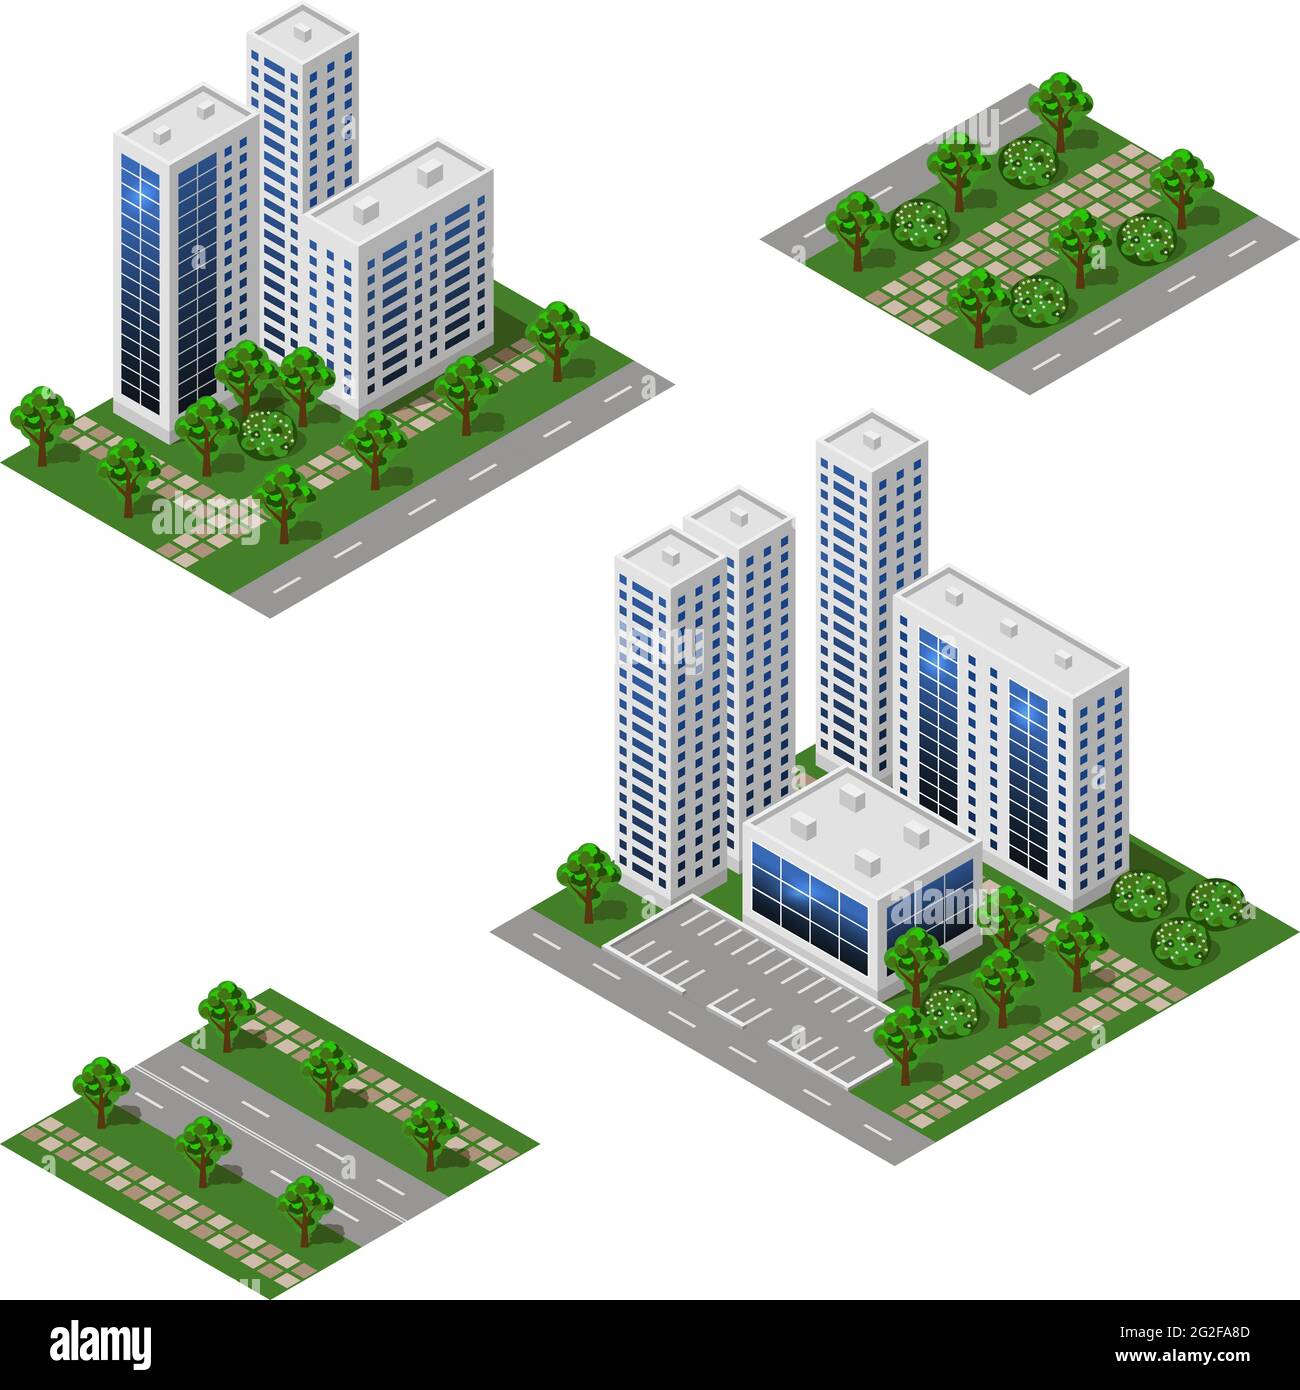 Isometric city set. Urban landscape 3d elements to design cityscape. Big modern buildings, street, trees, town garden. Isolated modules. Vector illust Stock Vector